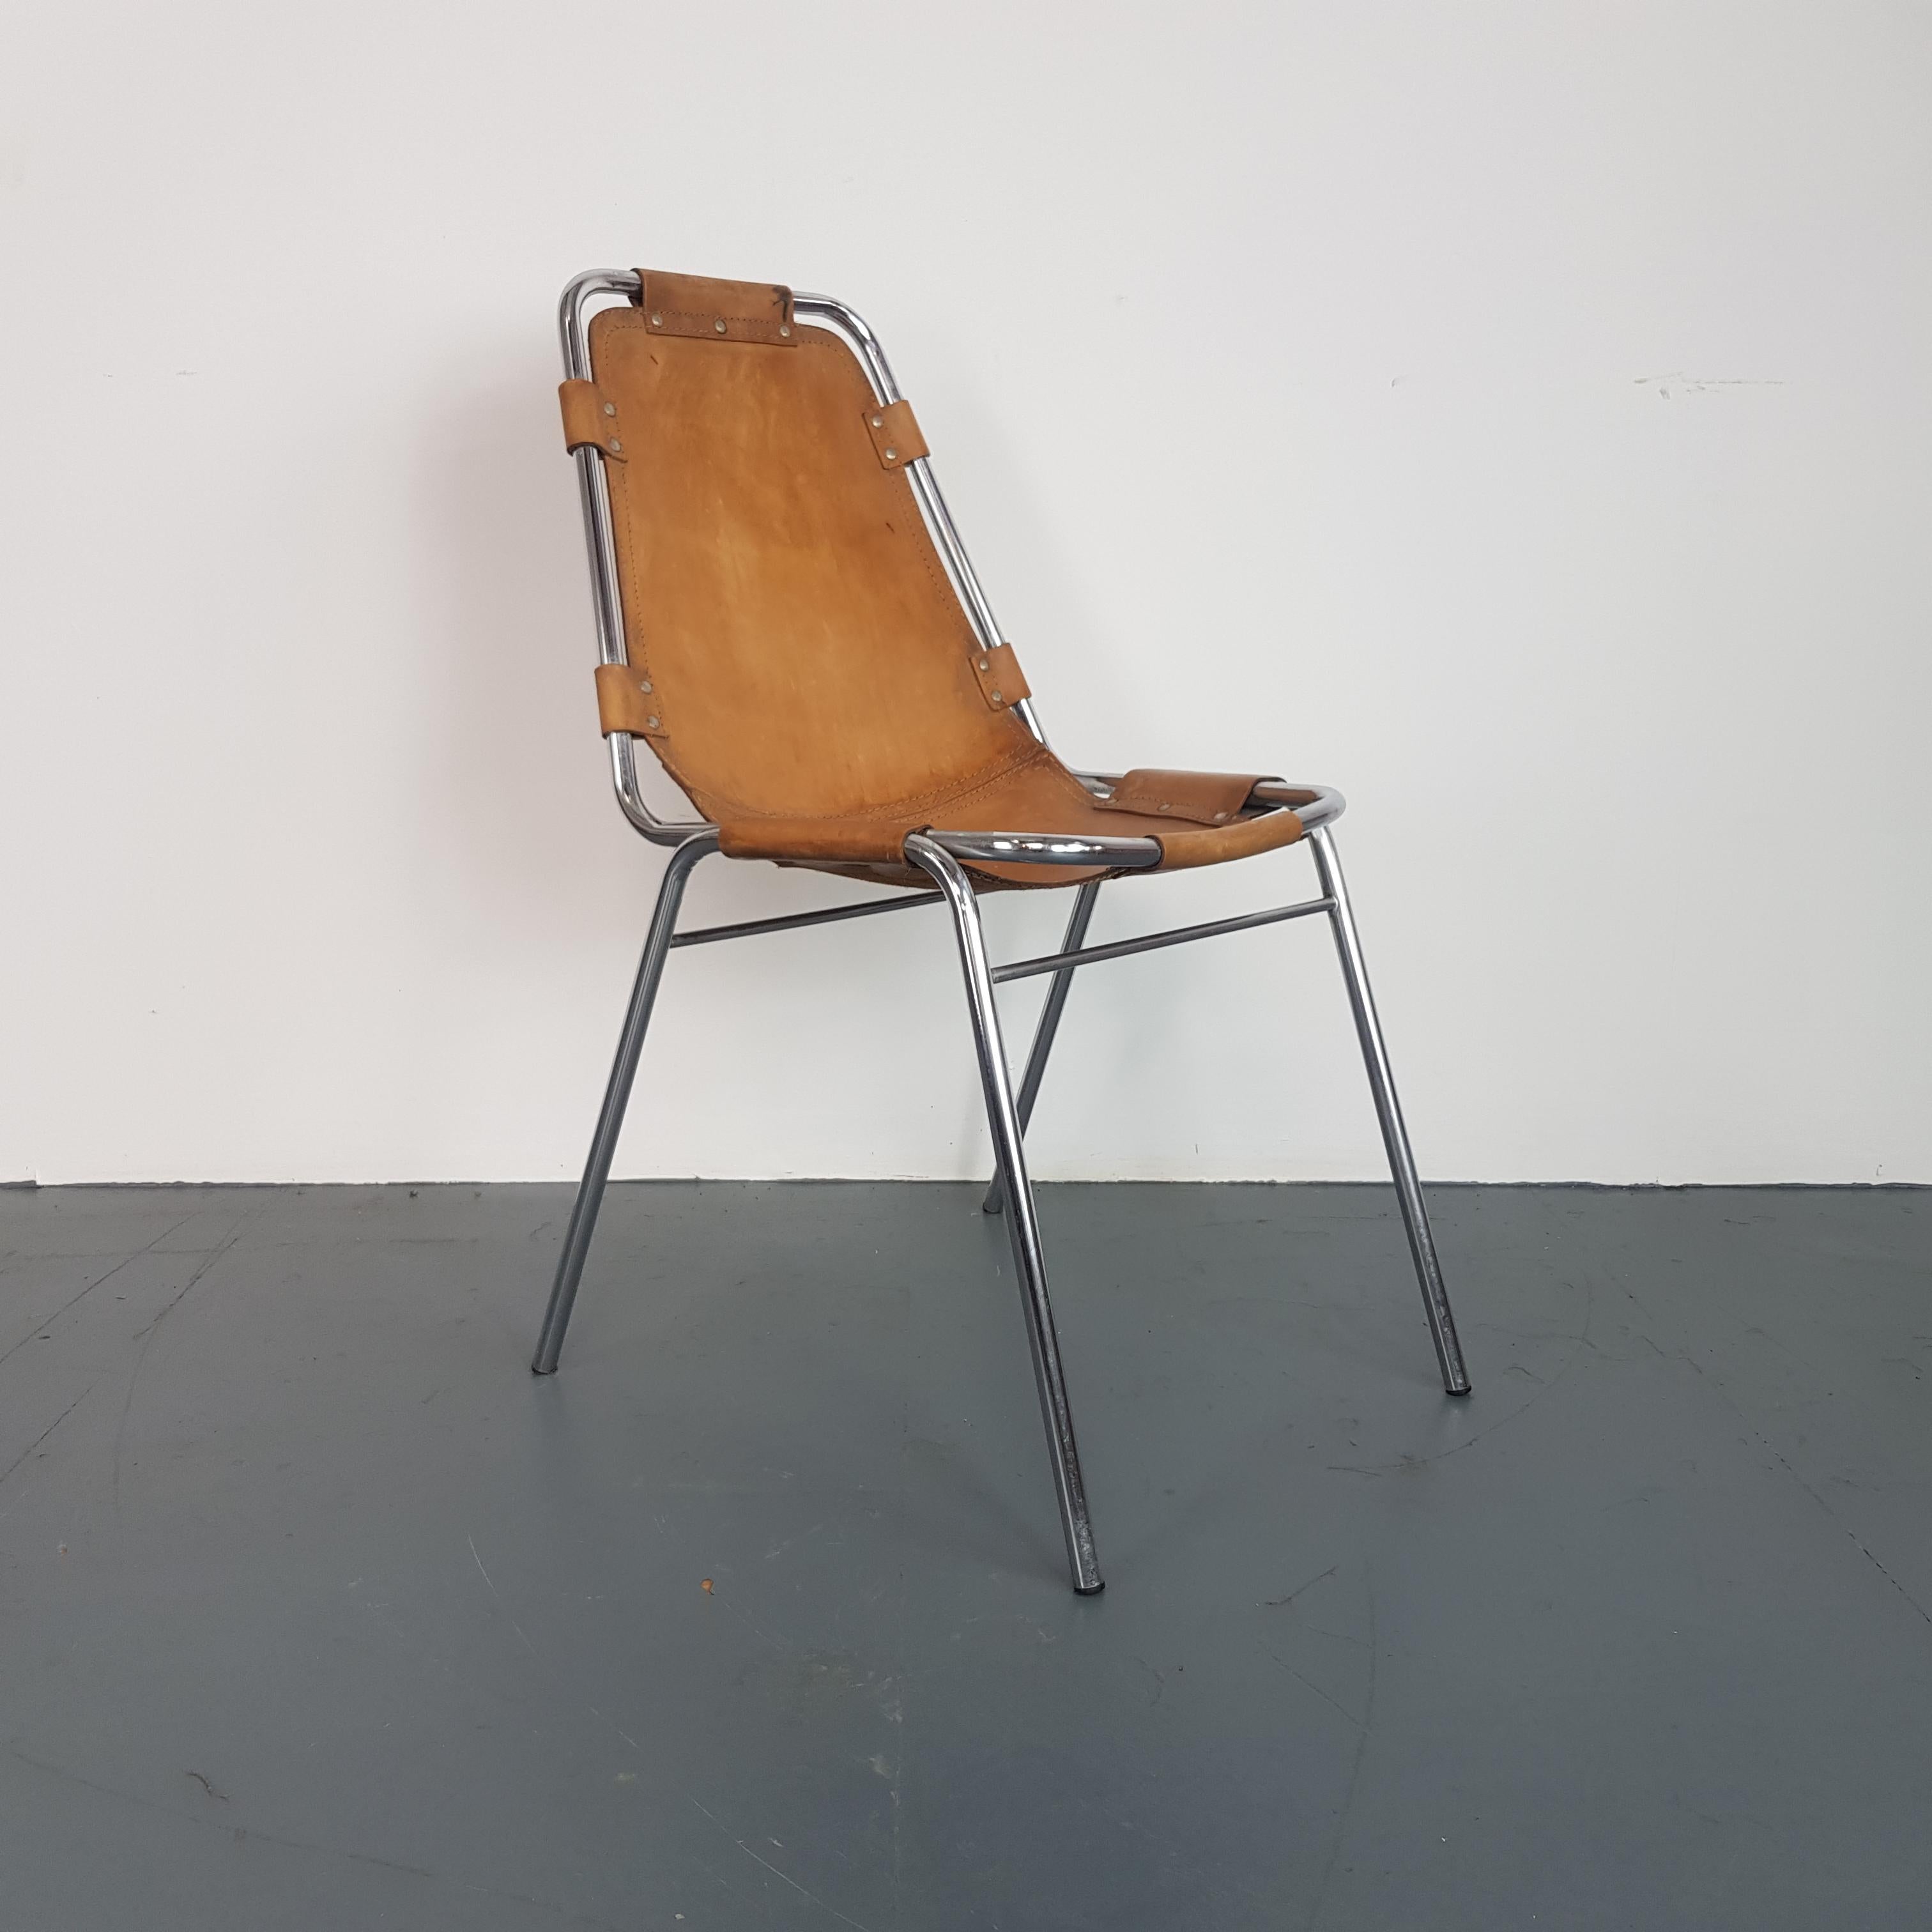 Gorgeous 1970s Les Arcs chair.

French architect and designer, Charlotte Perriand, 